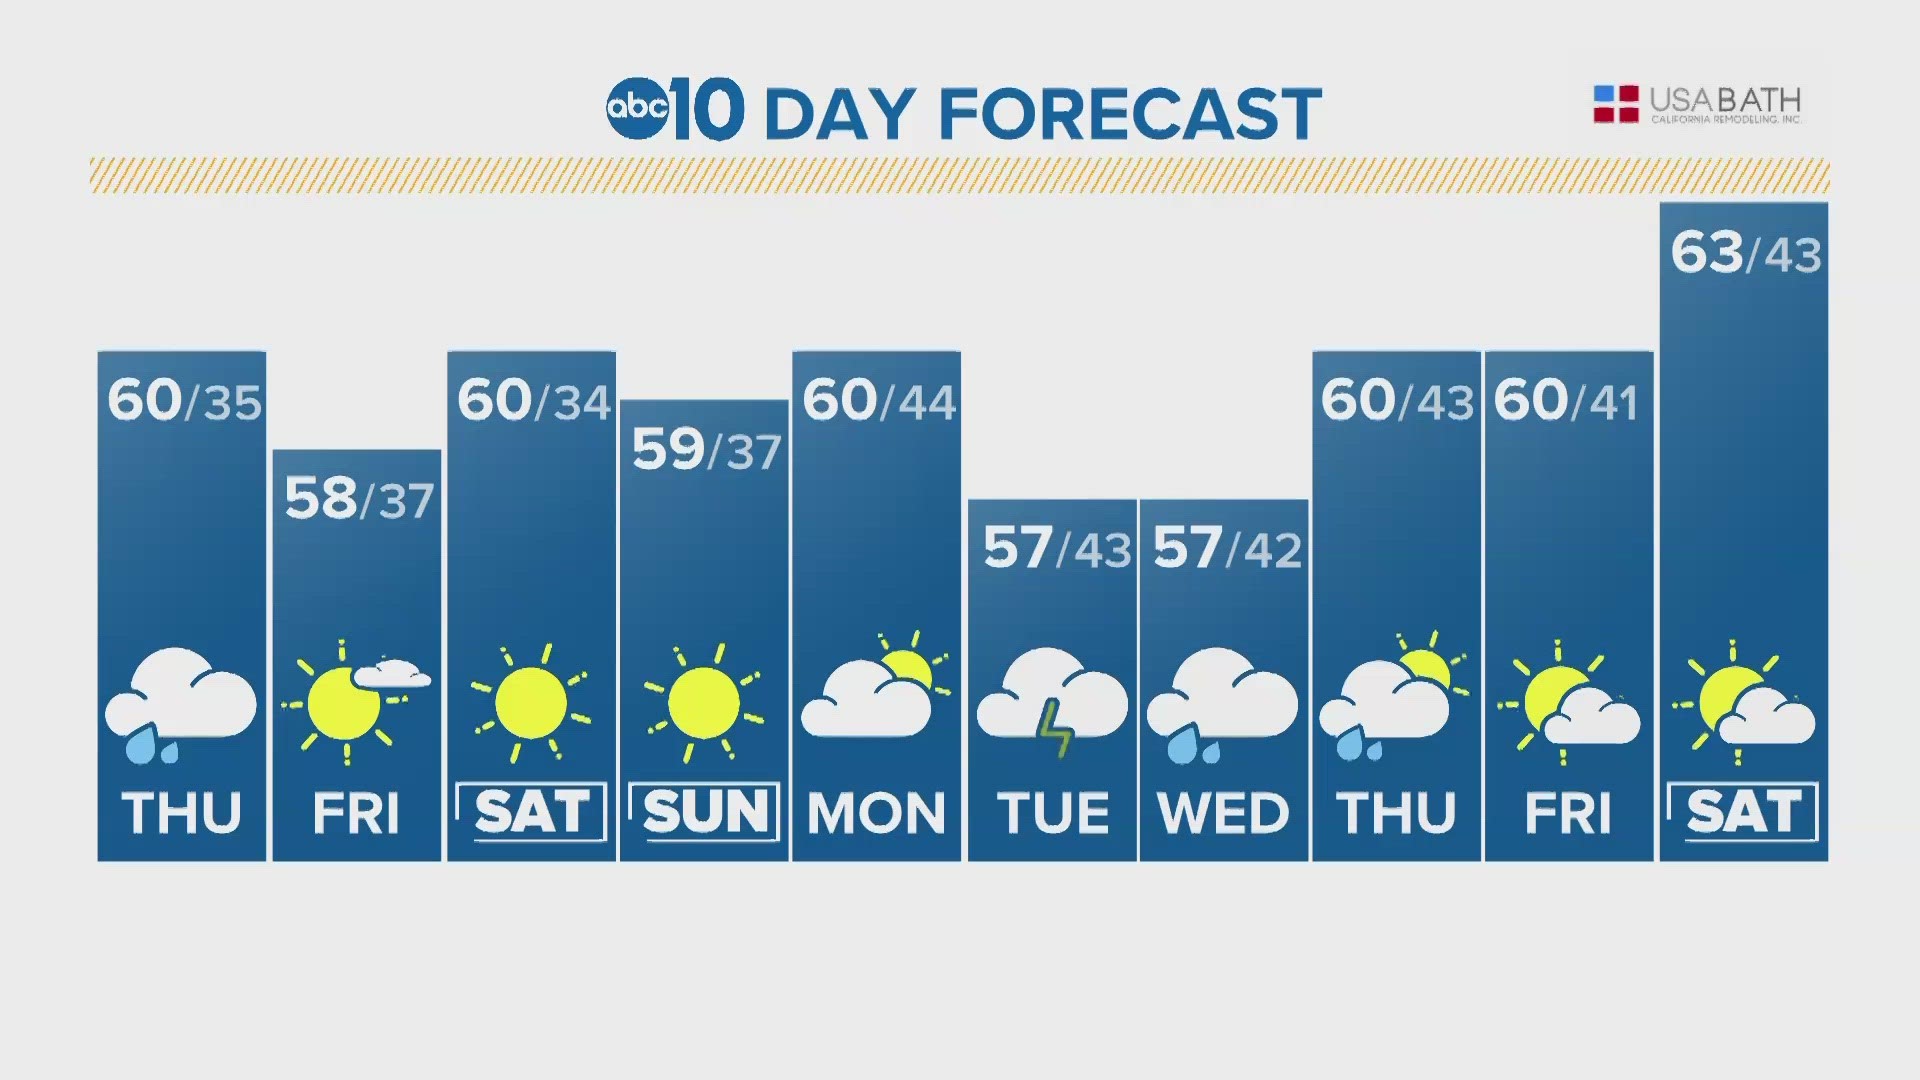 ABC10 Meteorologist Brenden Mincheff tells us what to expect for the next 10 days of weather.